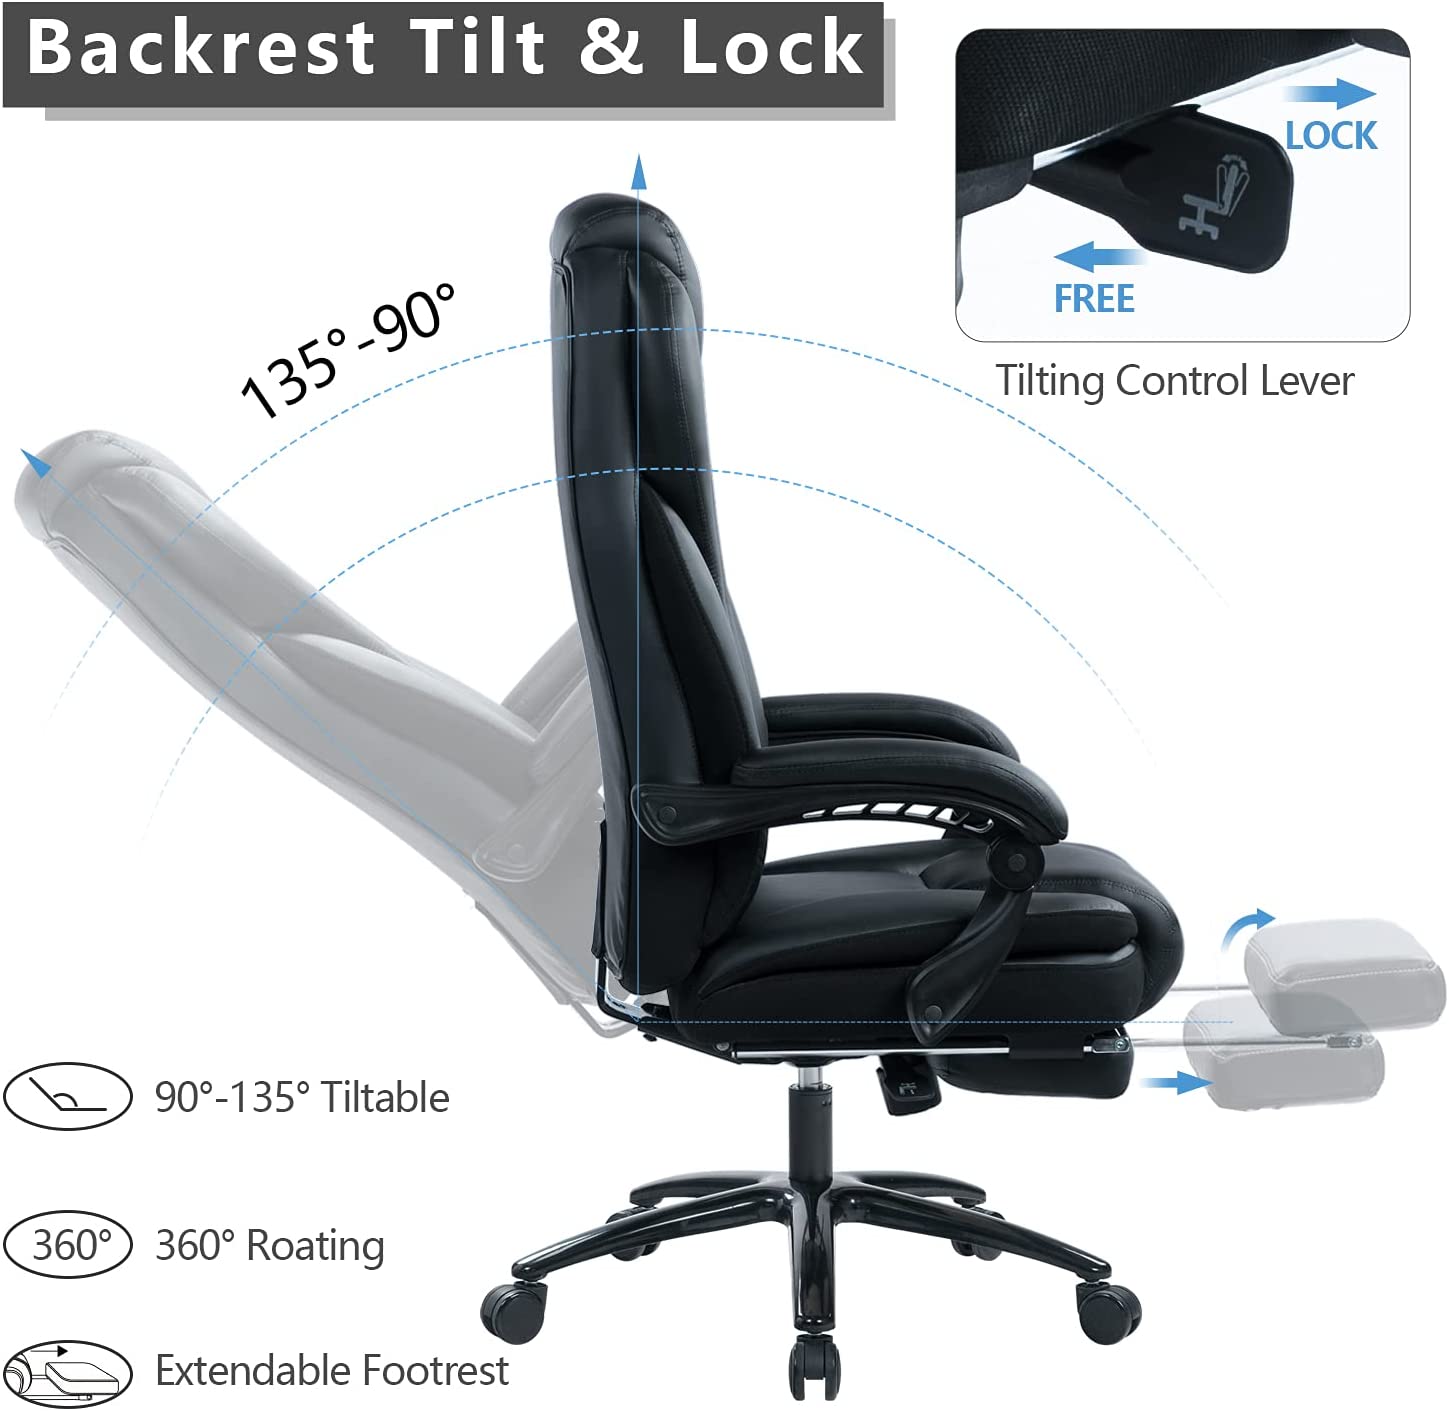 Arttoreal High Back Adjustable Executive Office Chair/Executive Recliner Chair, Black